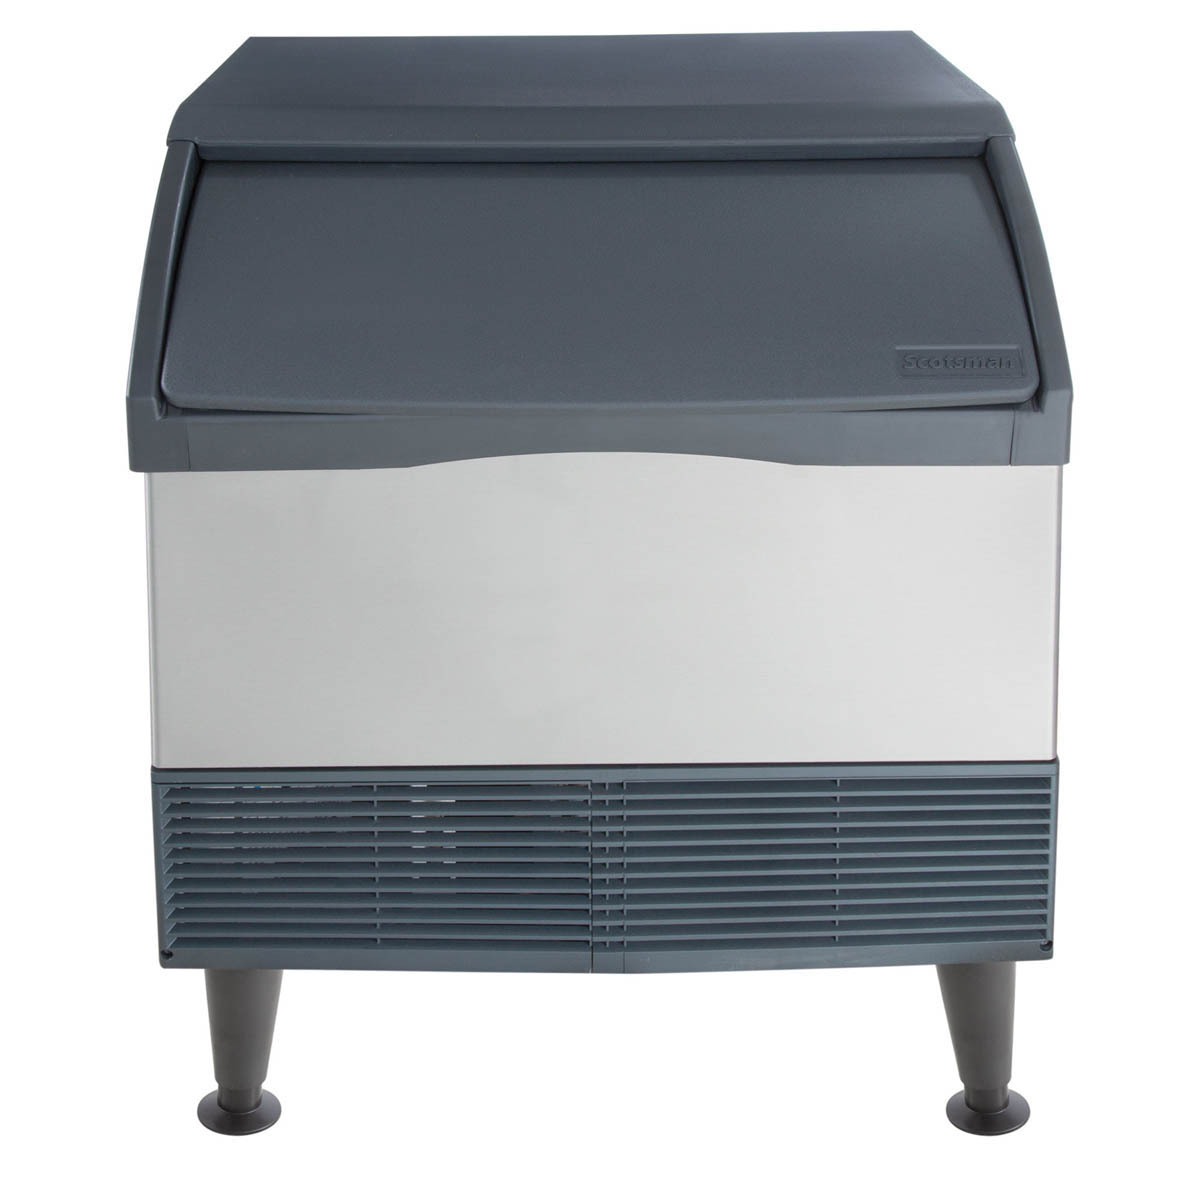 Scotsman CU3030SA-1 Self-Contained Under Counter Cuber with Storage, Chef's Deal